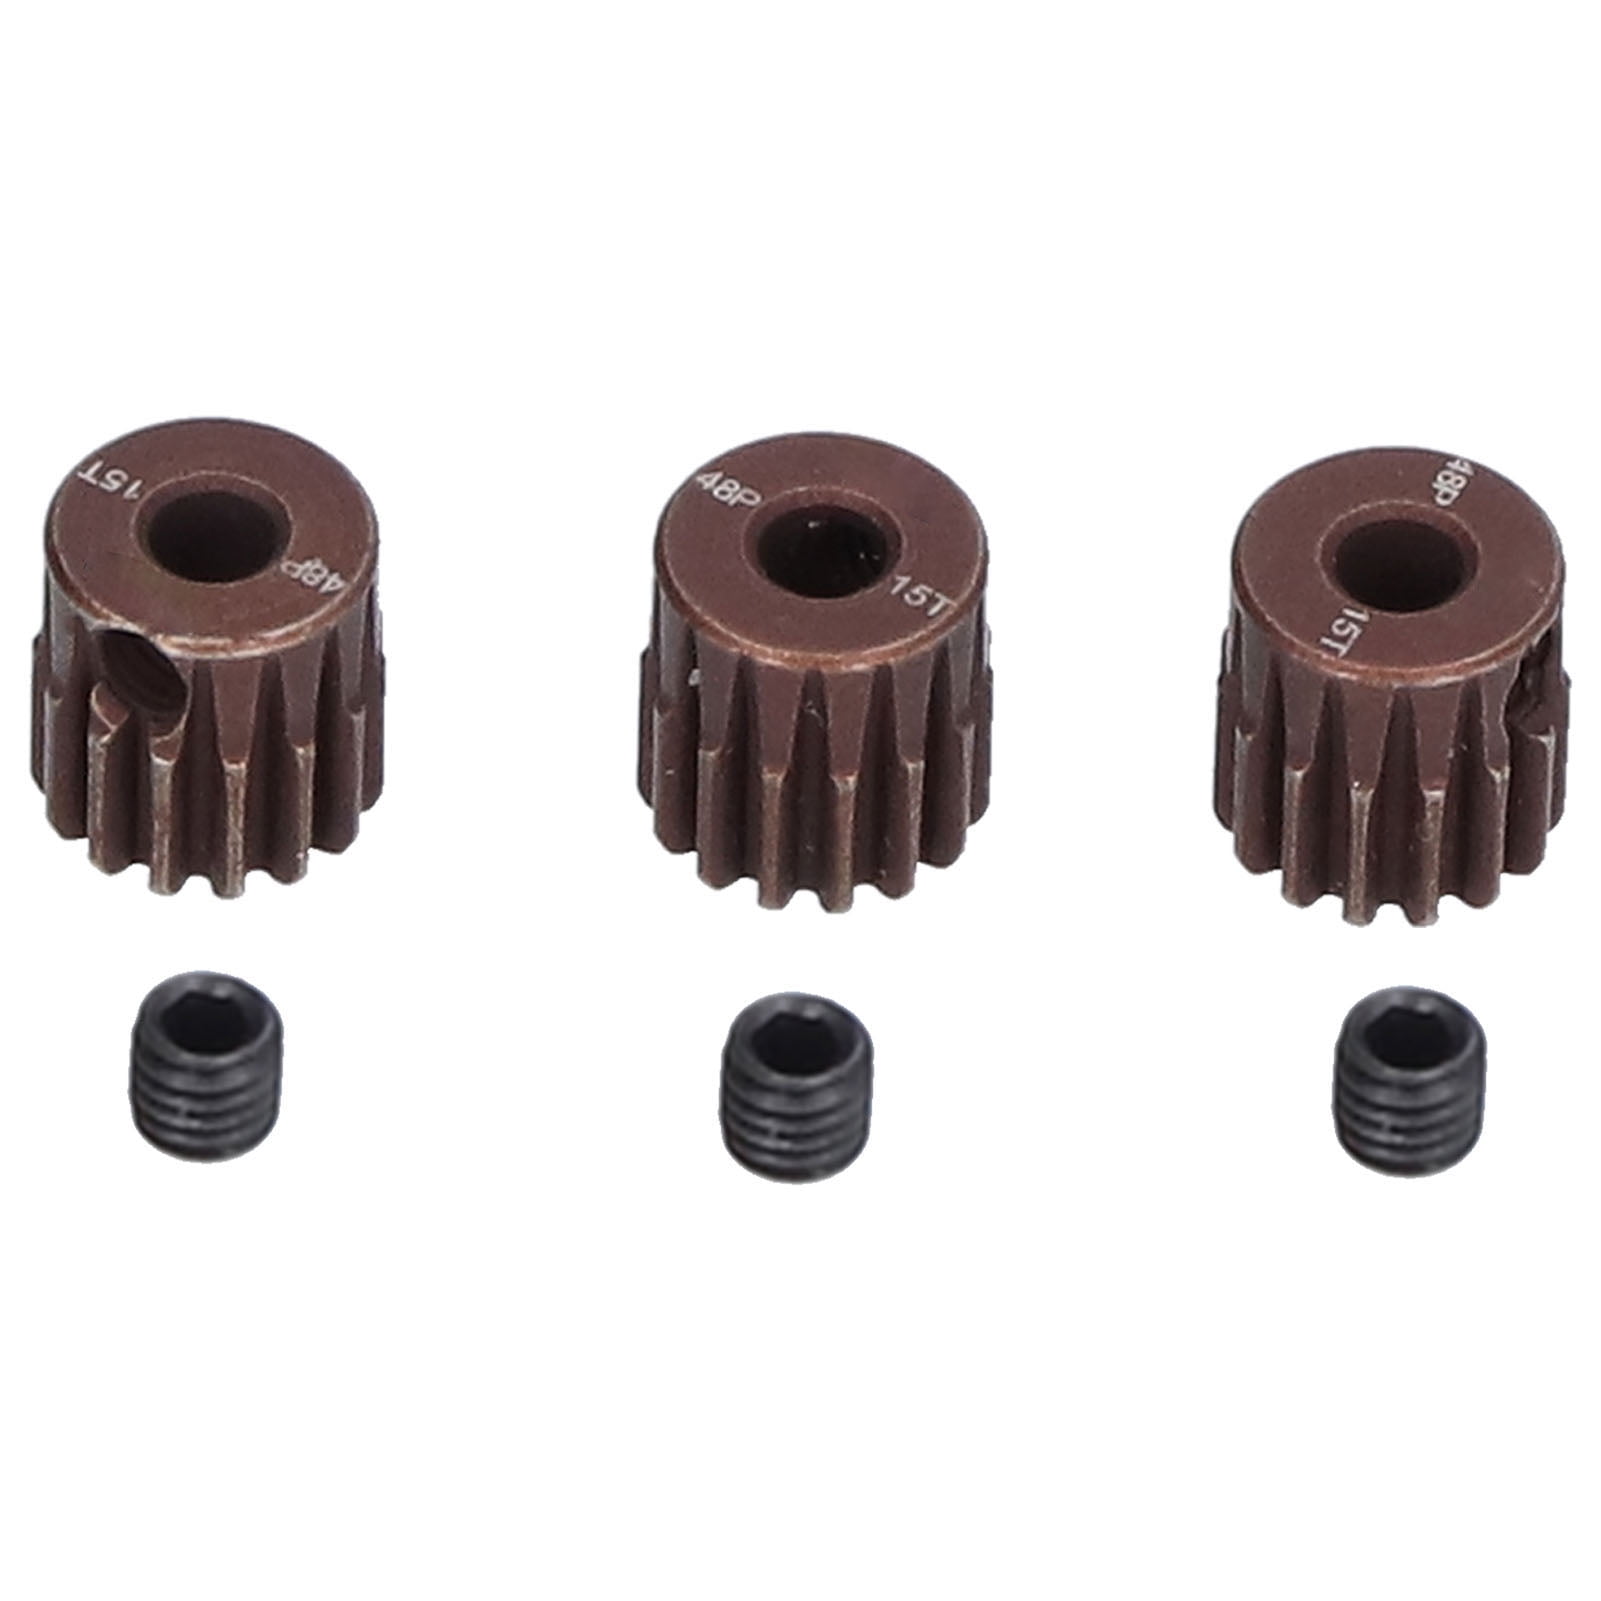 48DP 13T-15T Pinion 3.175mm Motor Gear Set for 1:10 RC Car DIY Accessories 